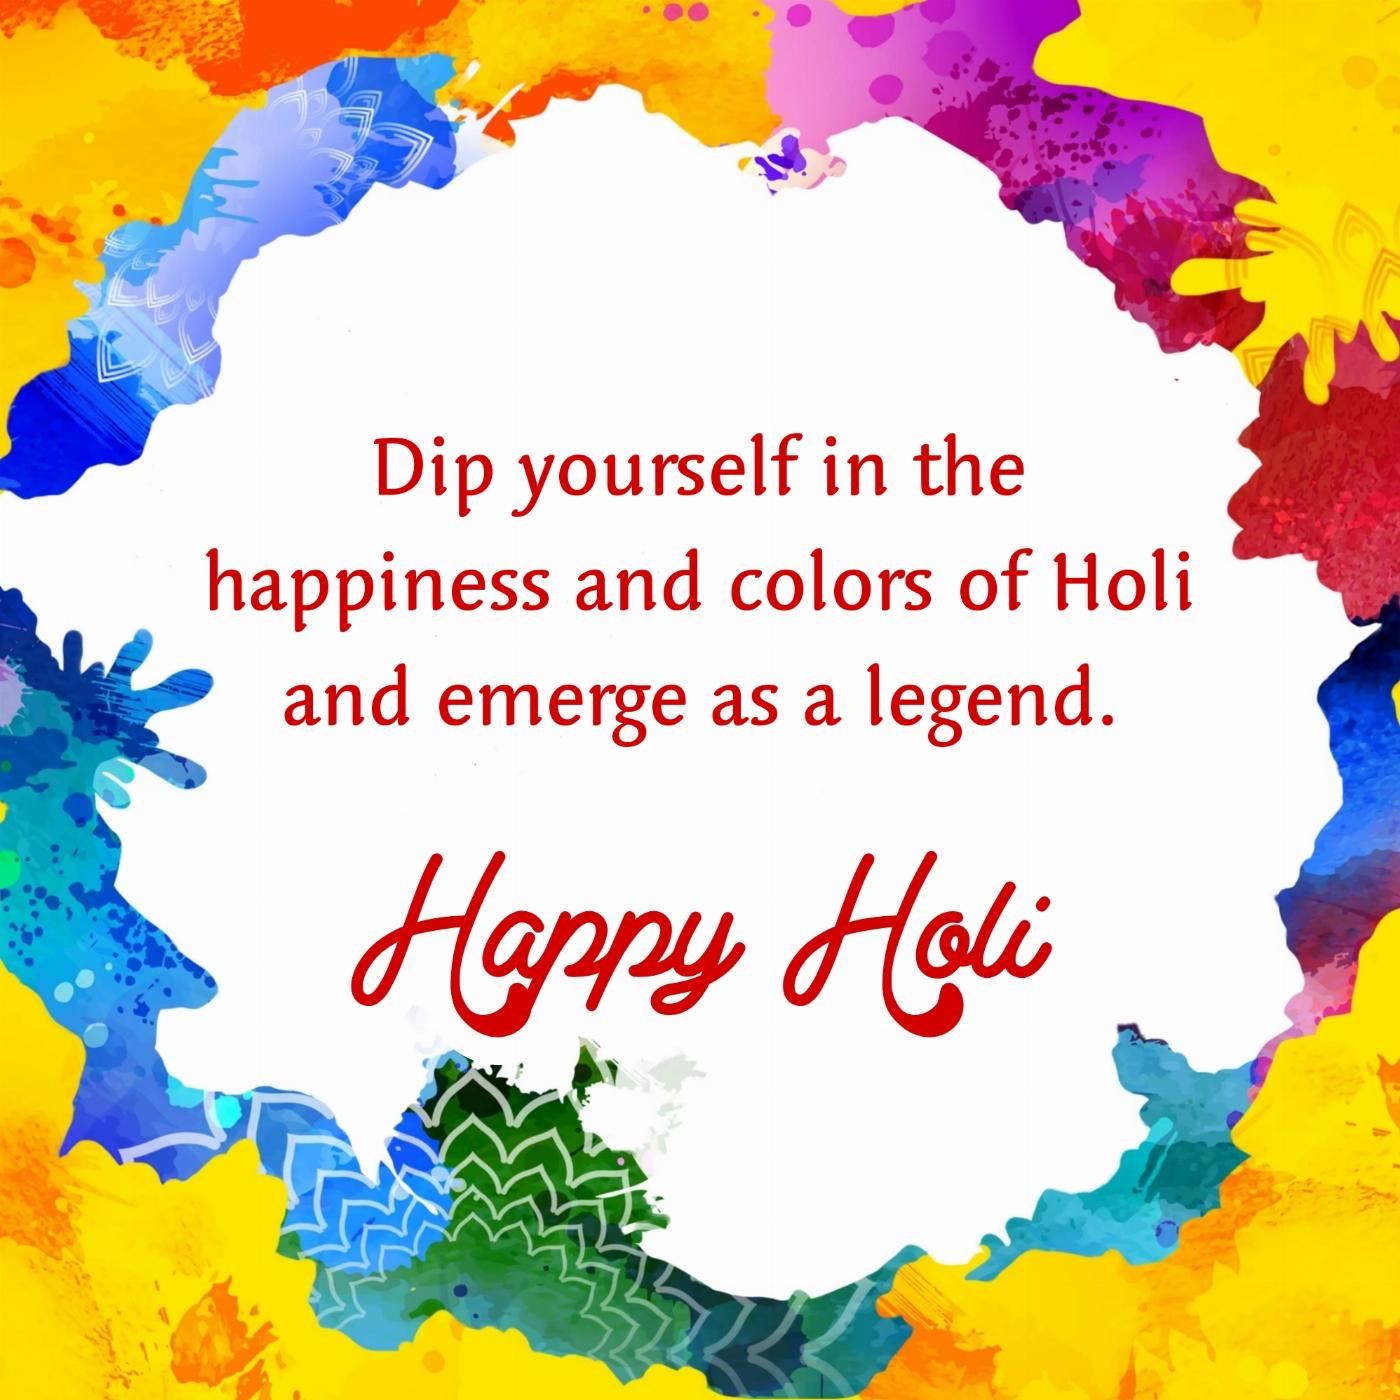 Dip yourself in the happiness and colors of Holi